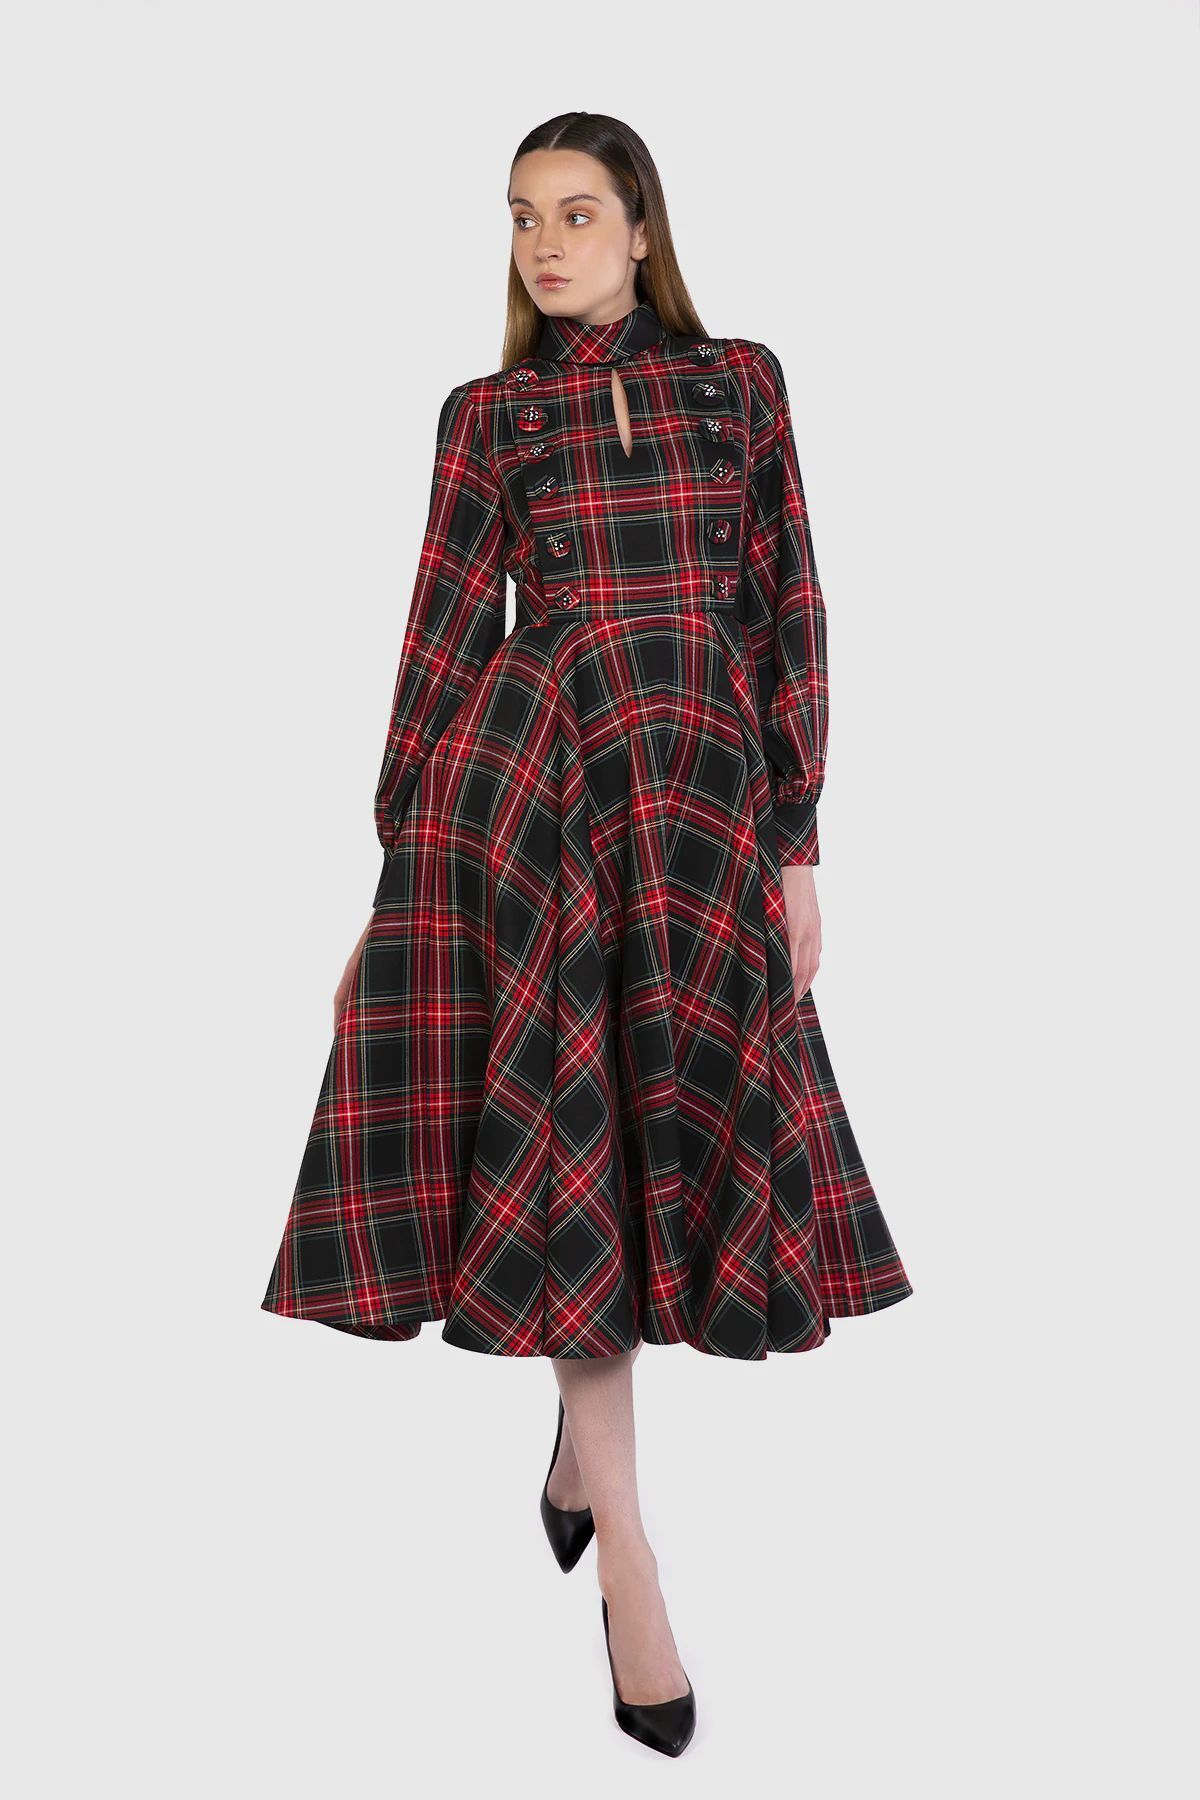  GIZIA - Button Detailed Ankle Length Plaid Red Dress